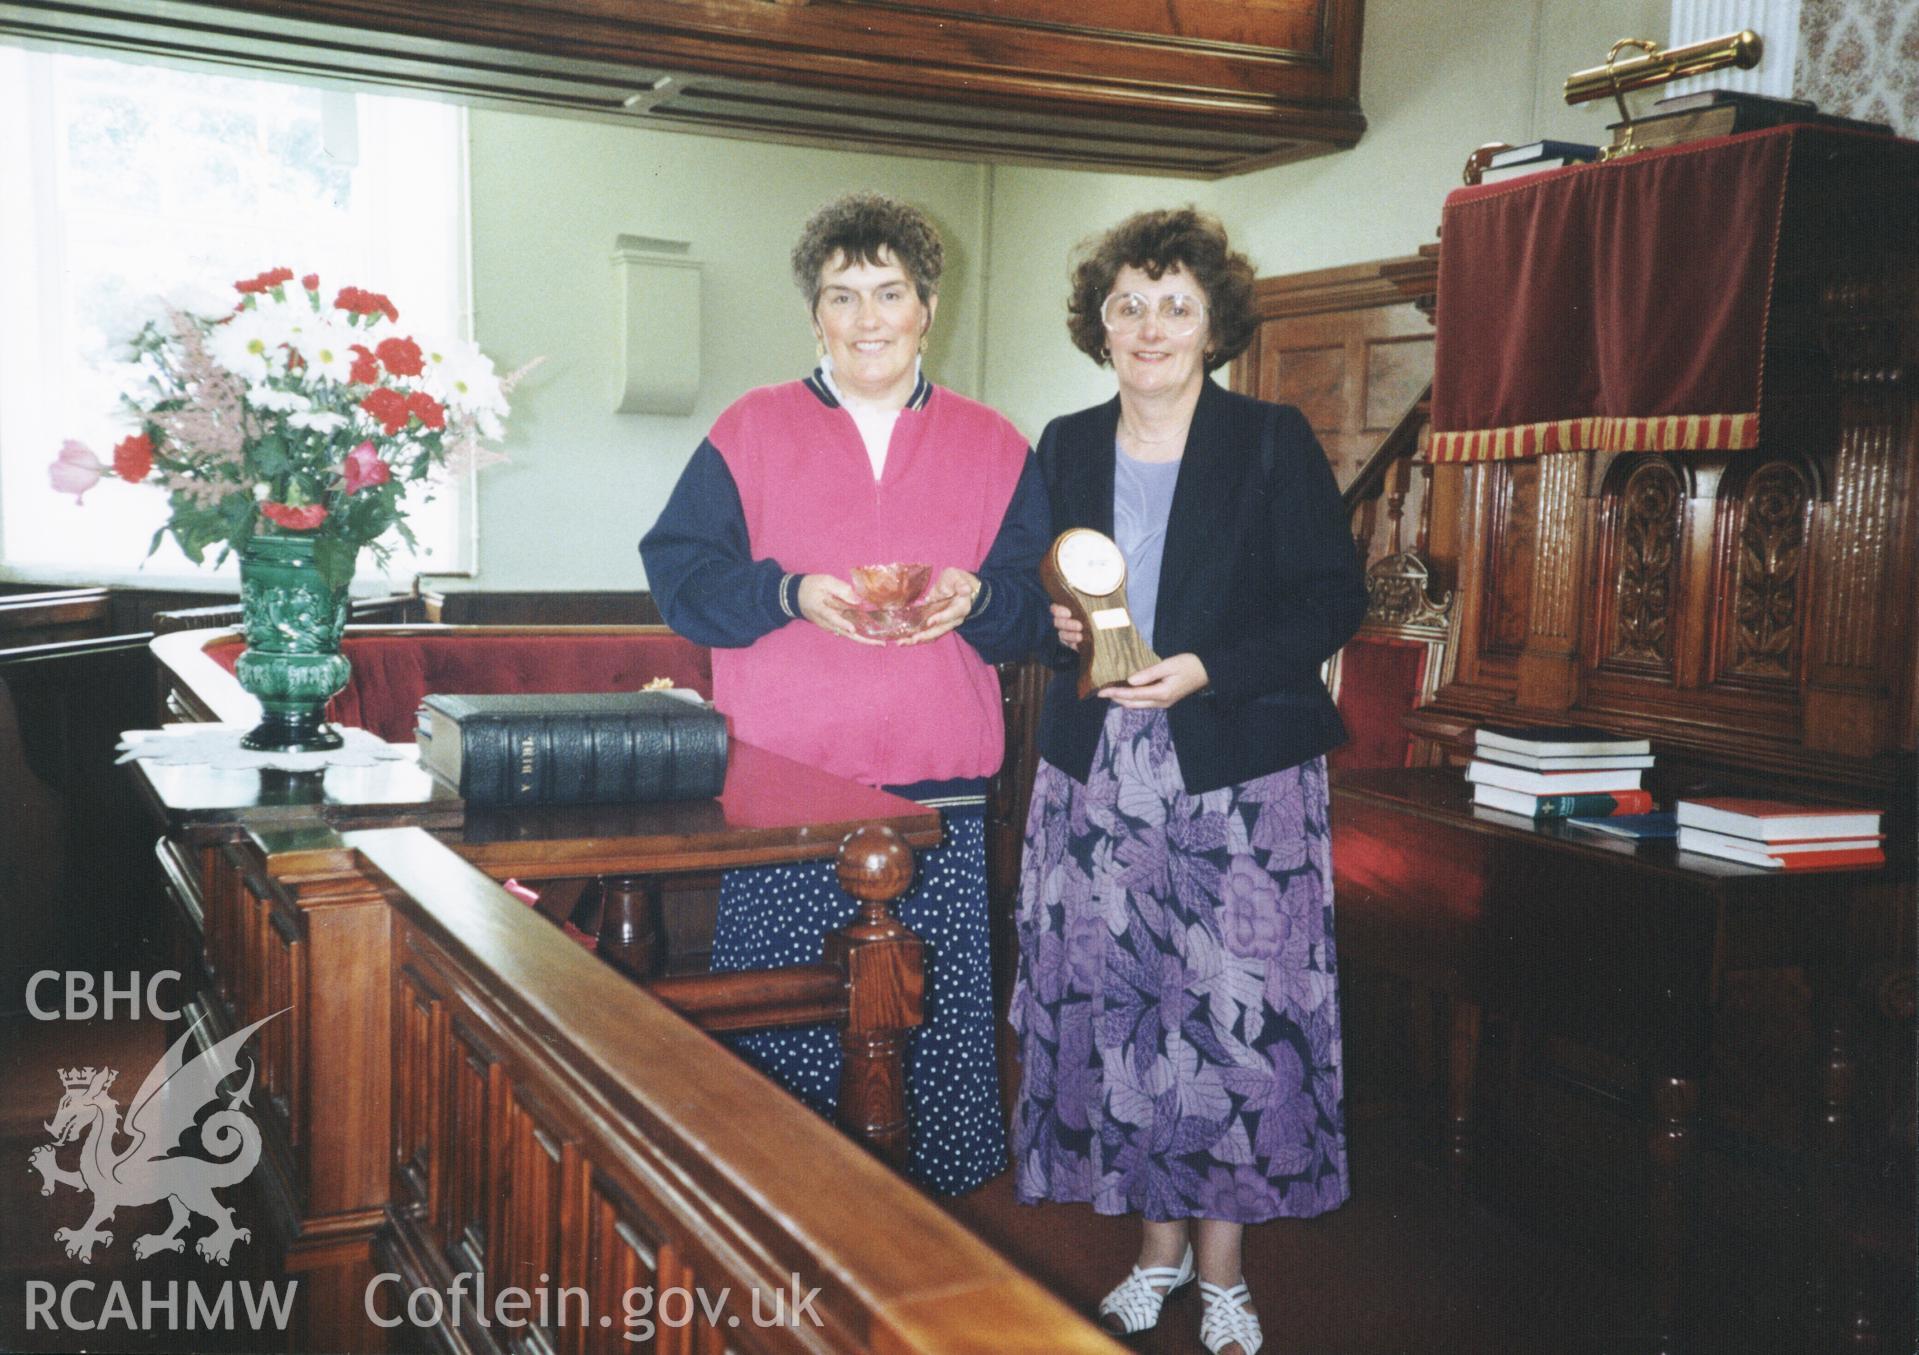 Colour photograph of Rowens Griffiths & Catherine Jones following a presentation marking their service to the chapel Sunday School. Donated as part of the Digital Dissent Project.